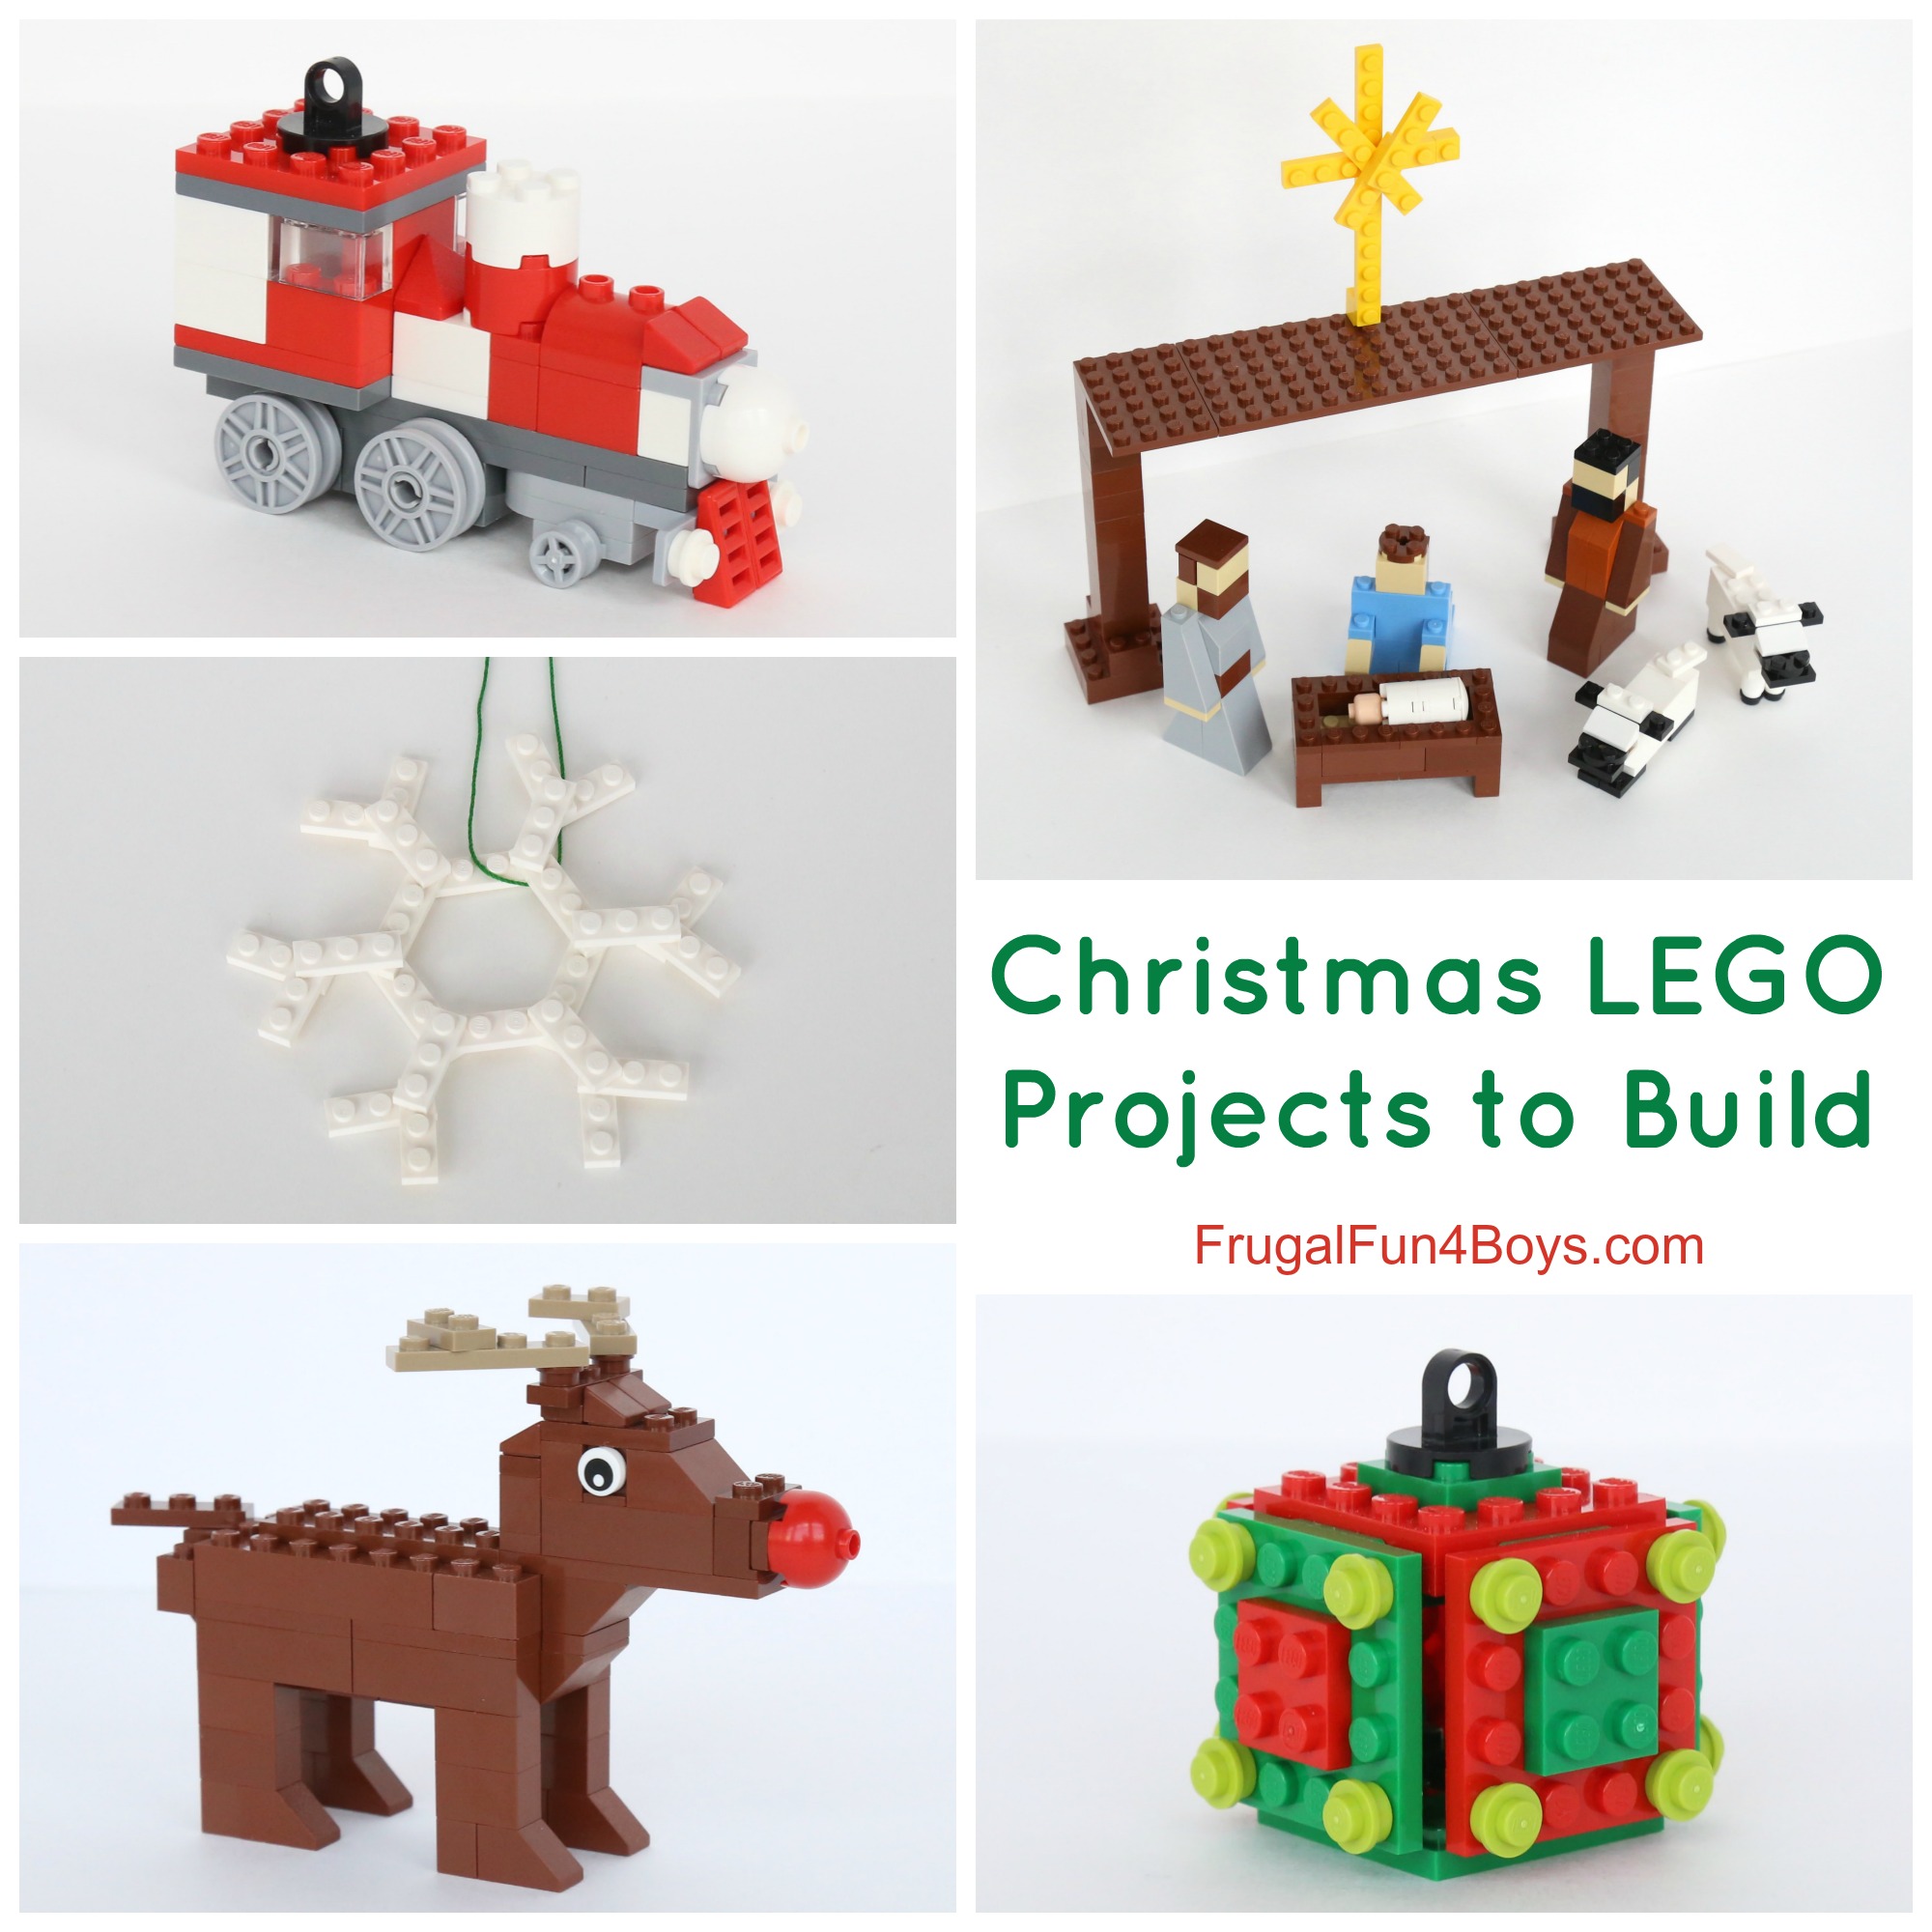 Five Christmas LEGO Projects to Build with Instructions